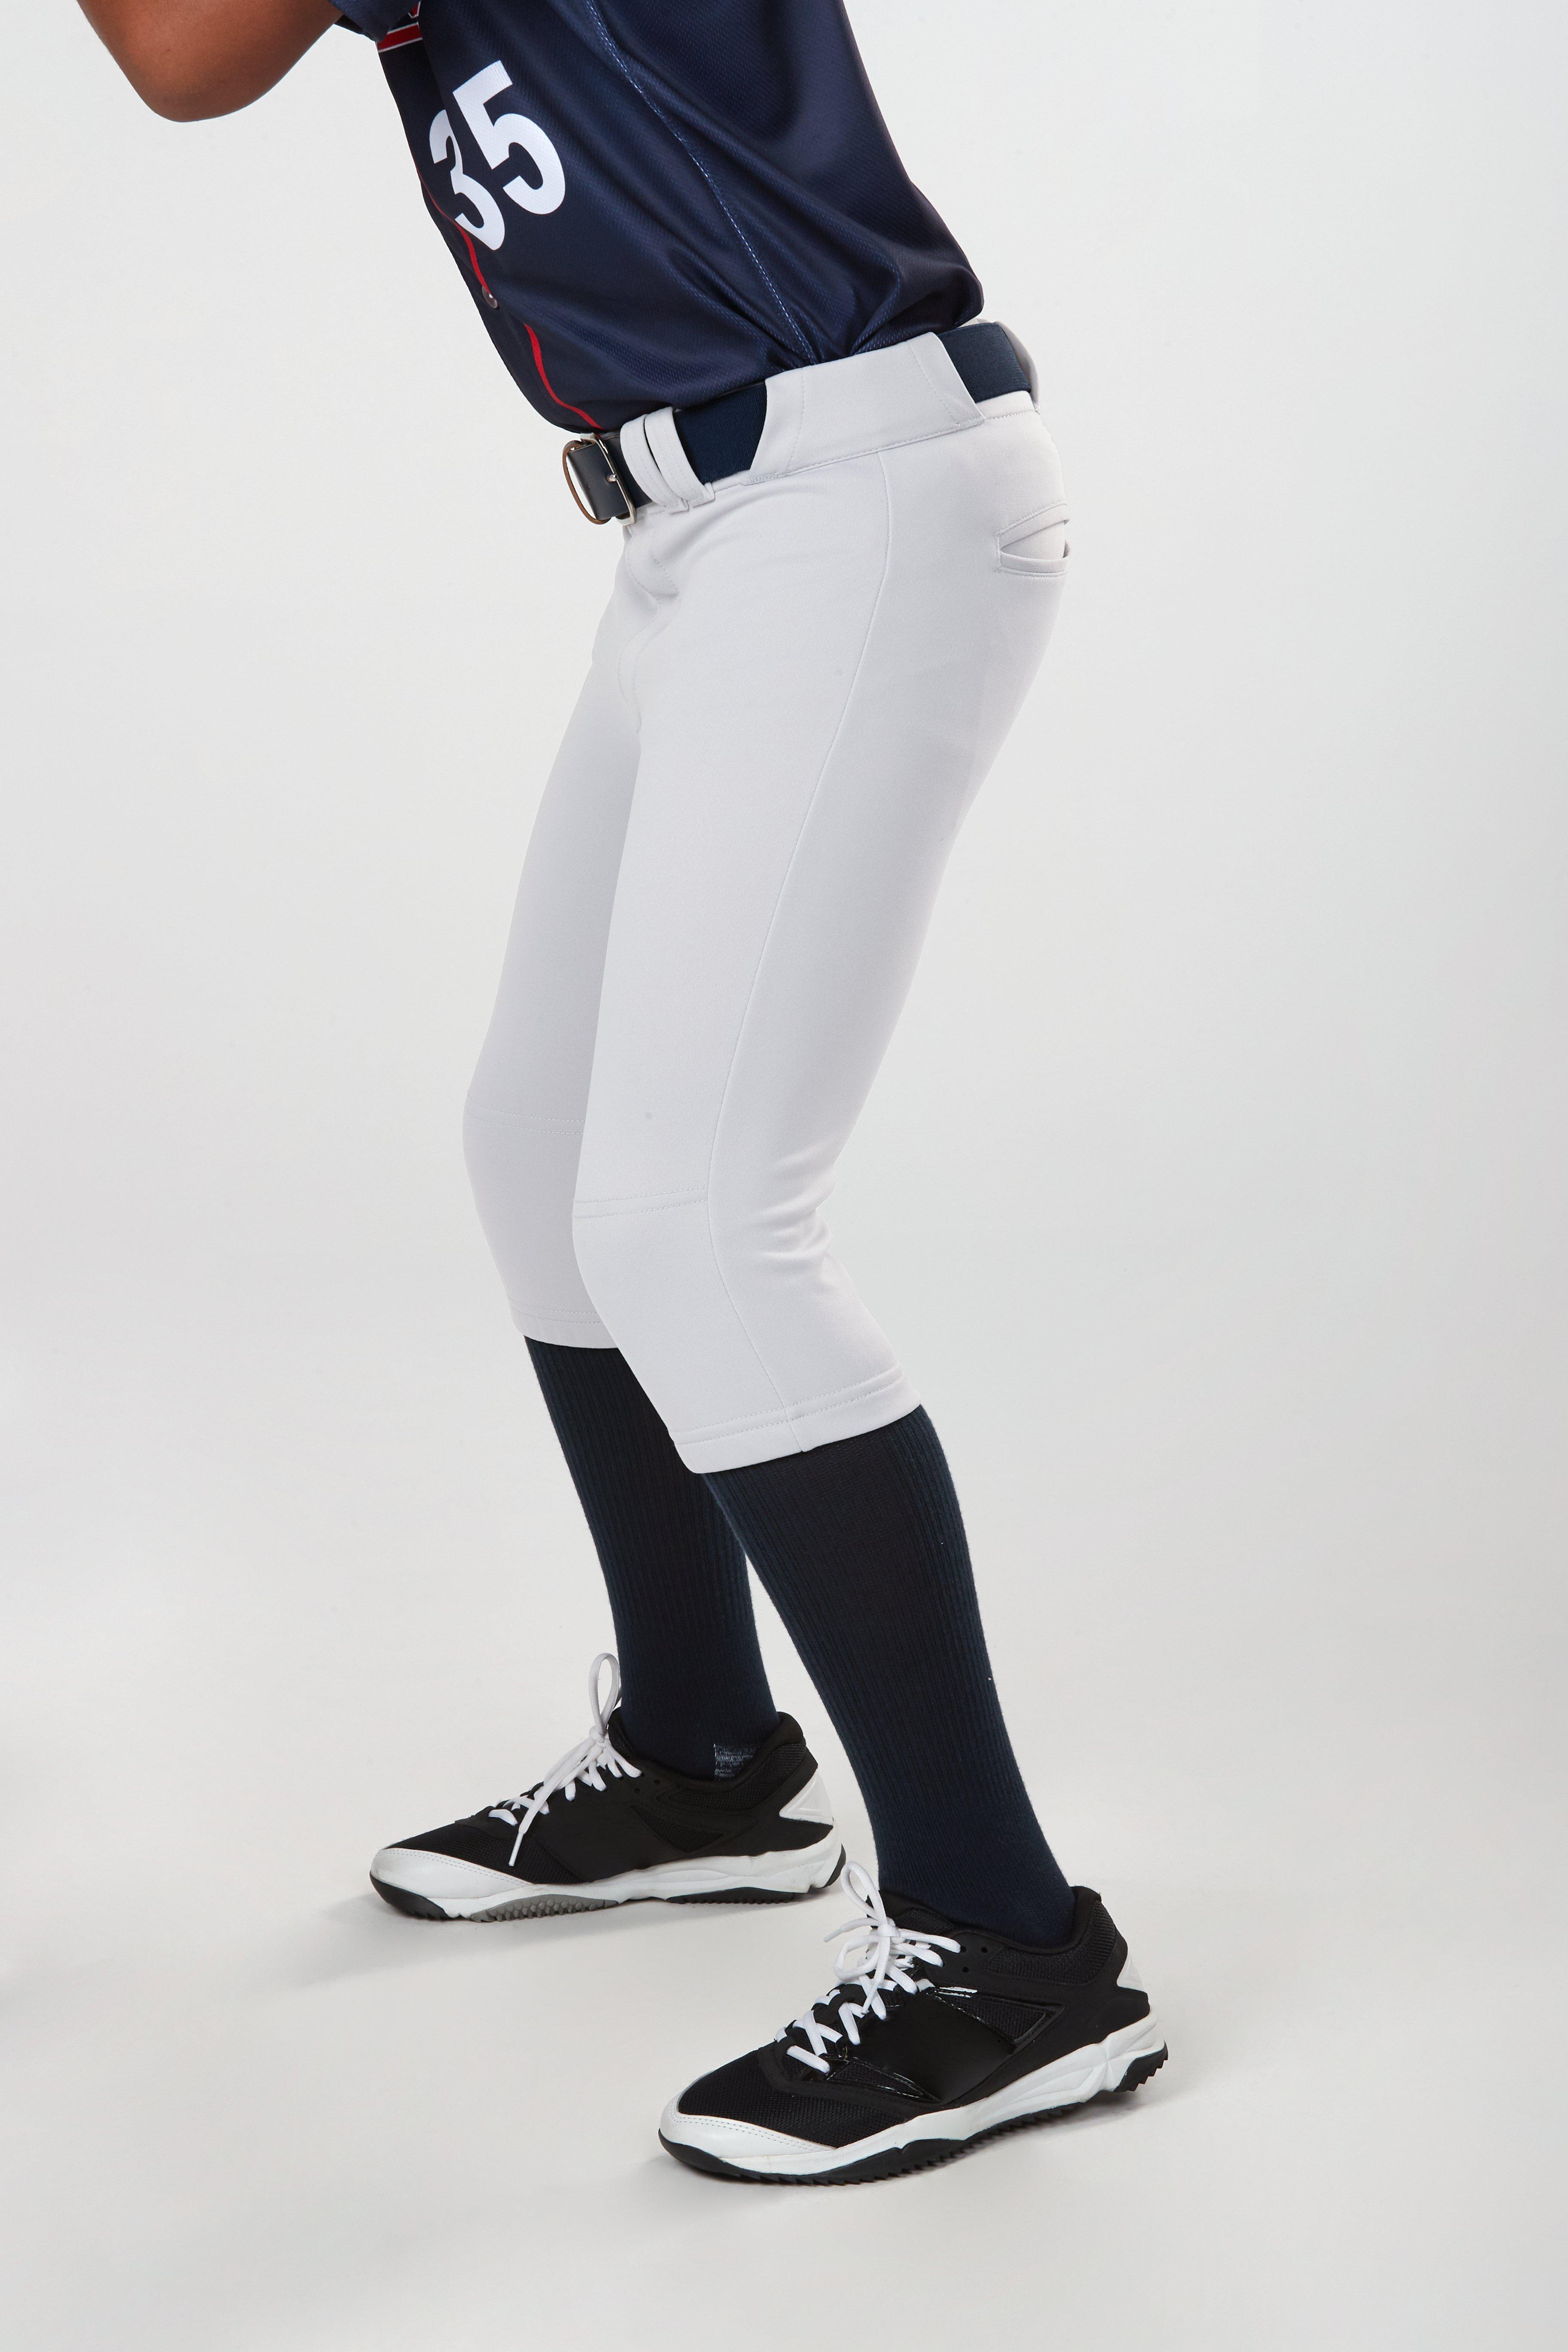 Details about   Wilson Youth Unisex T200 Baseball Softball Pants White 